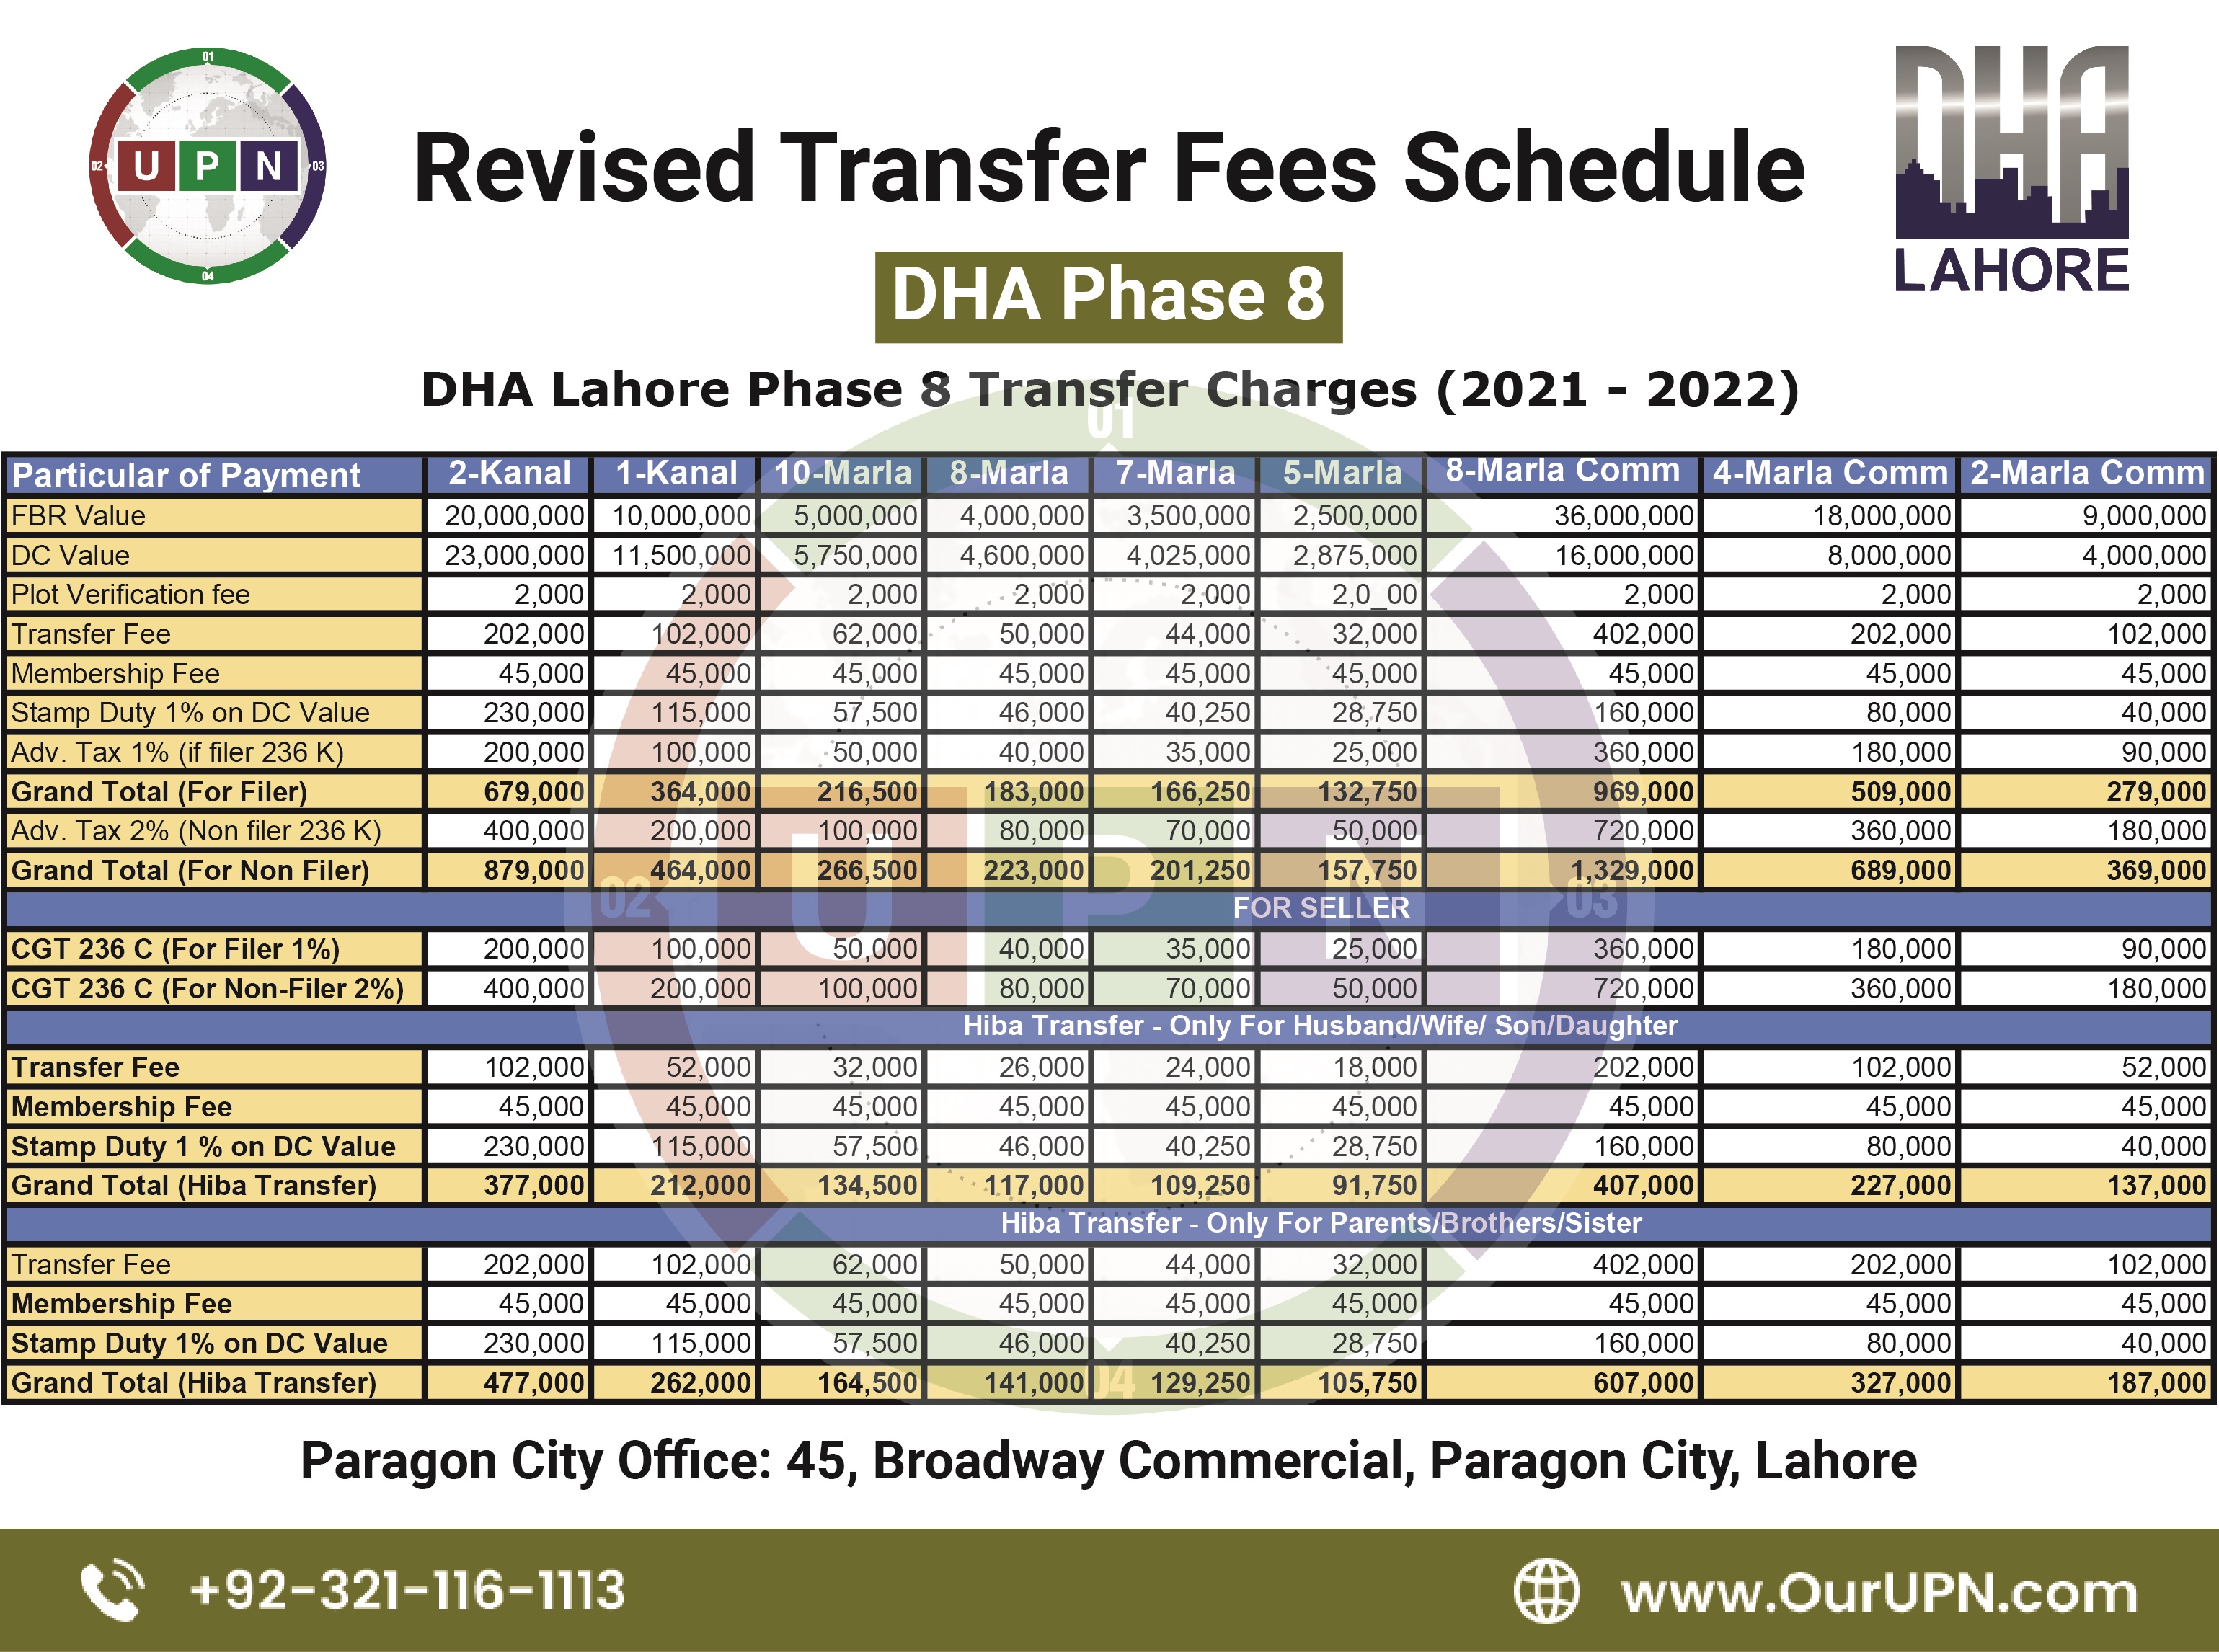 DHA LAHORE PHASE 8 Transfer fee Charges